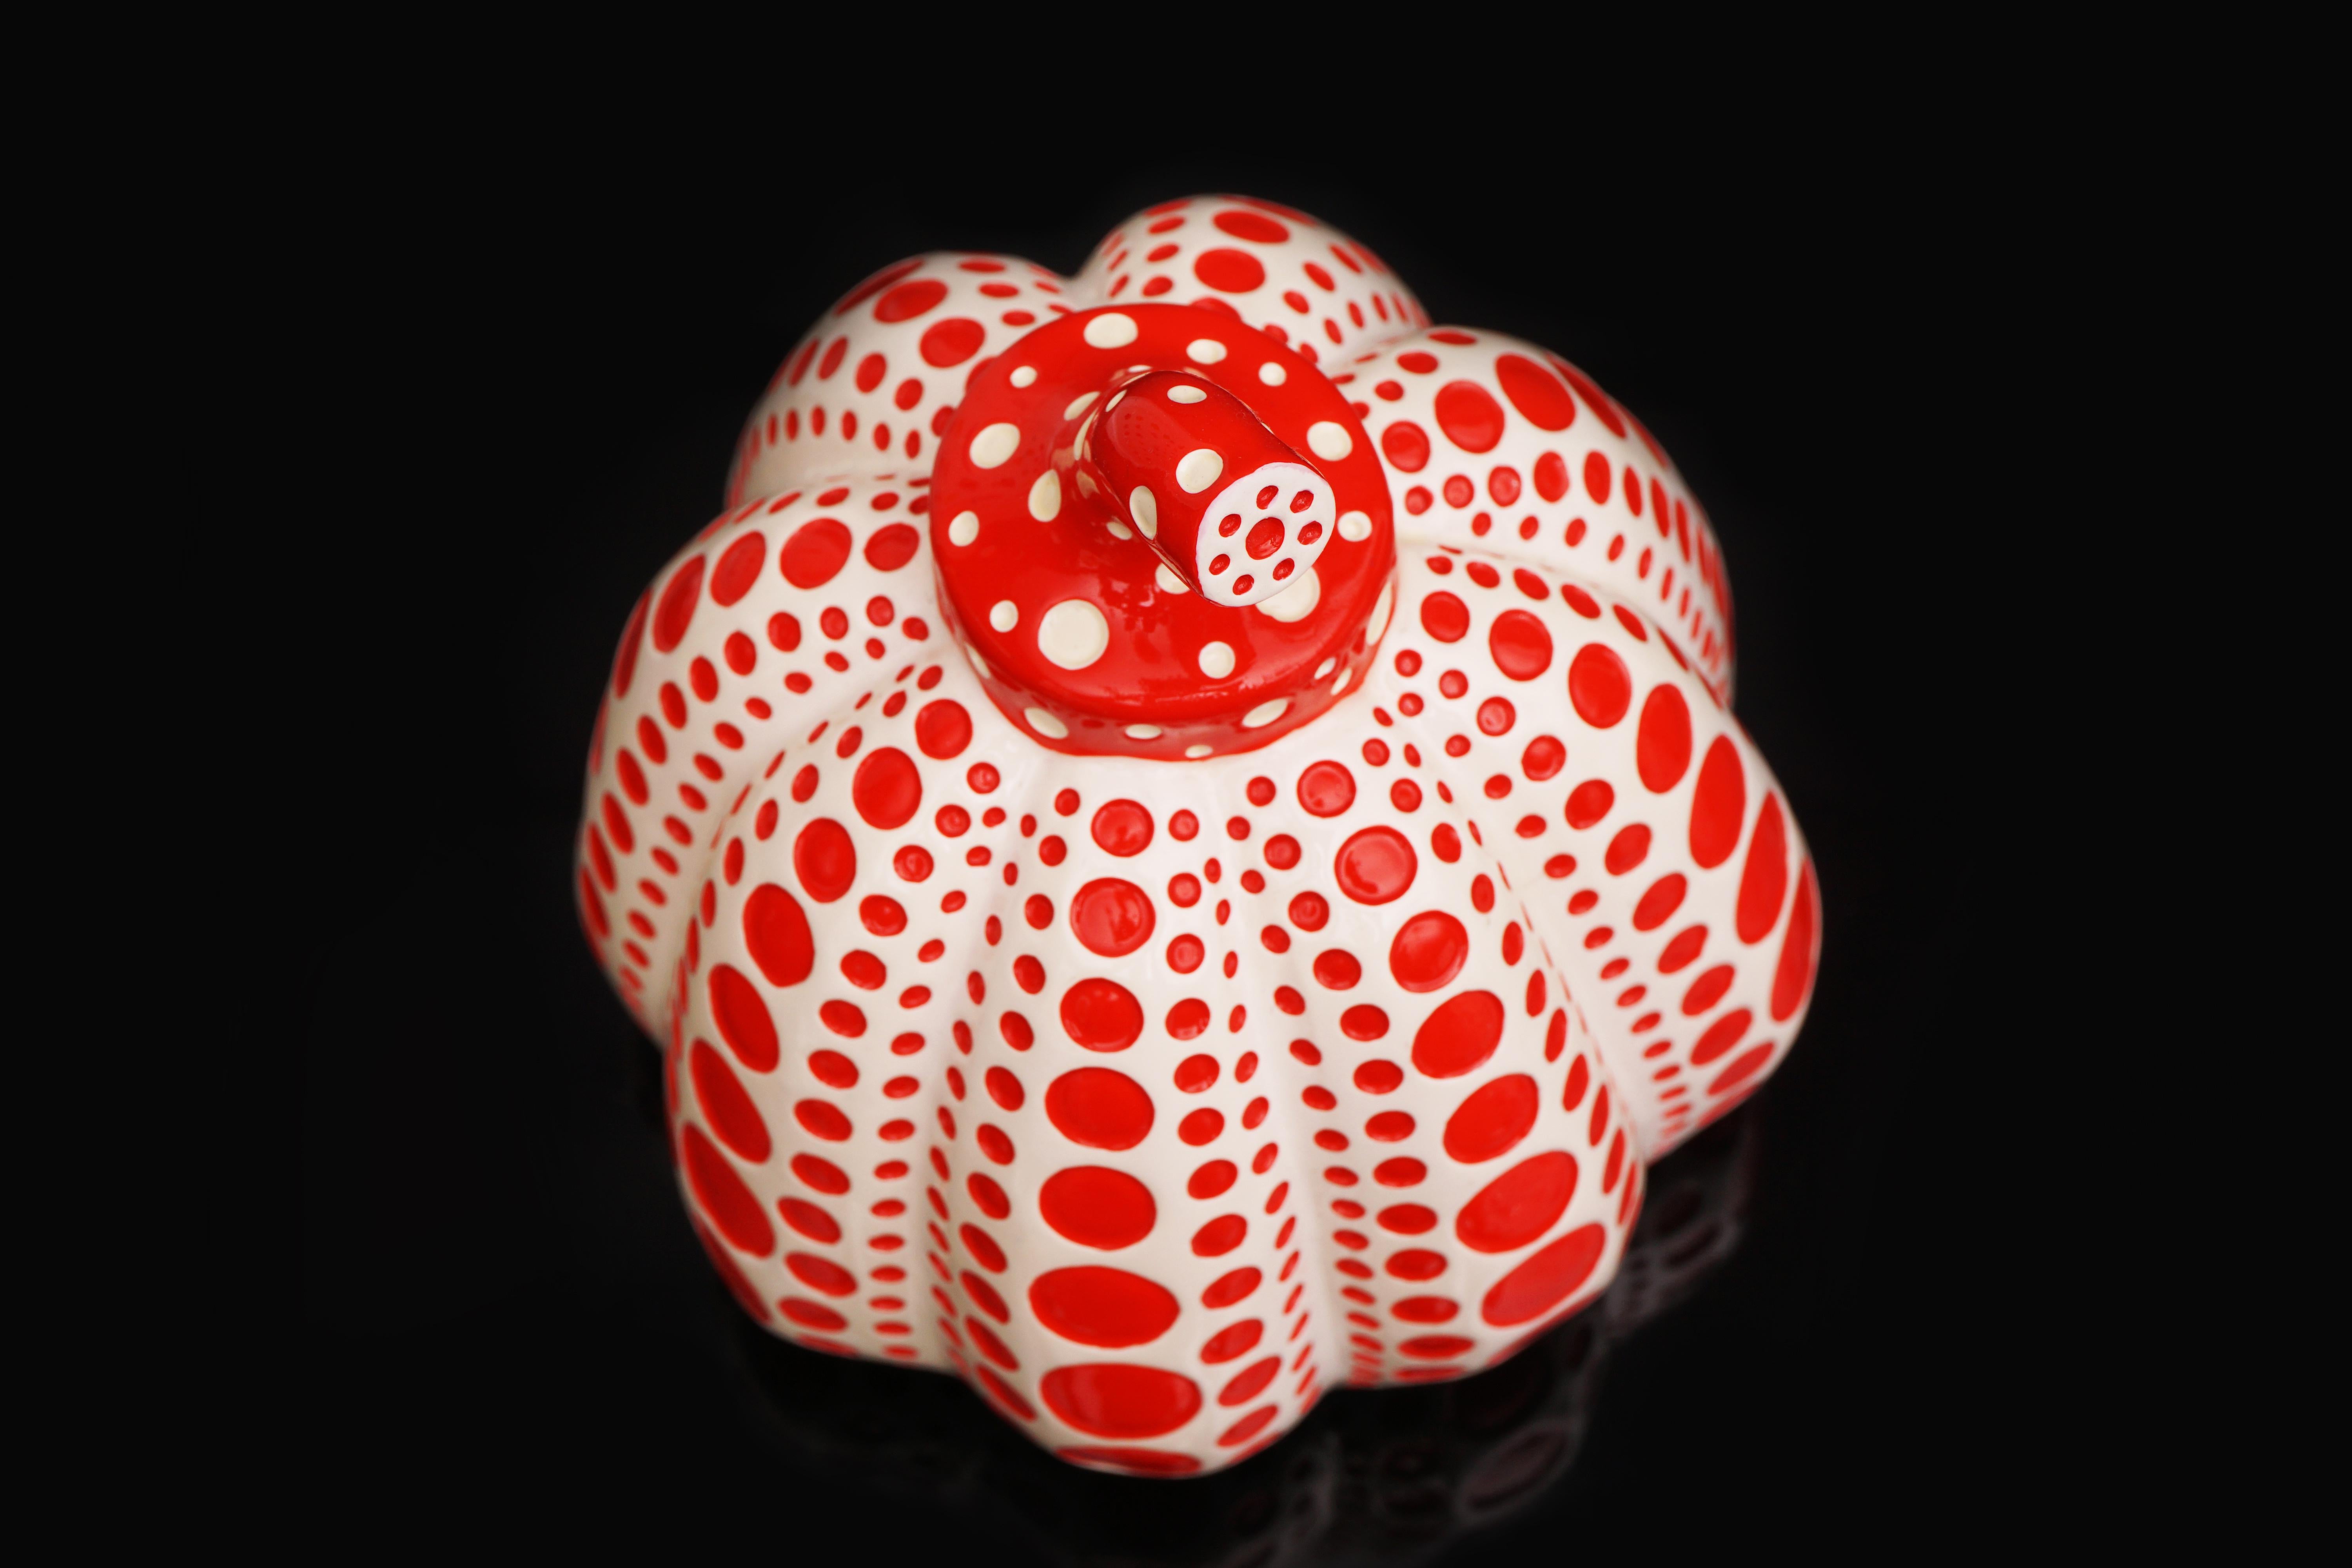 Yayoi Kusama, 'Pumpkin' White/Red, Collectable Resin Sculpture, 2016 2